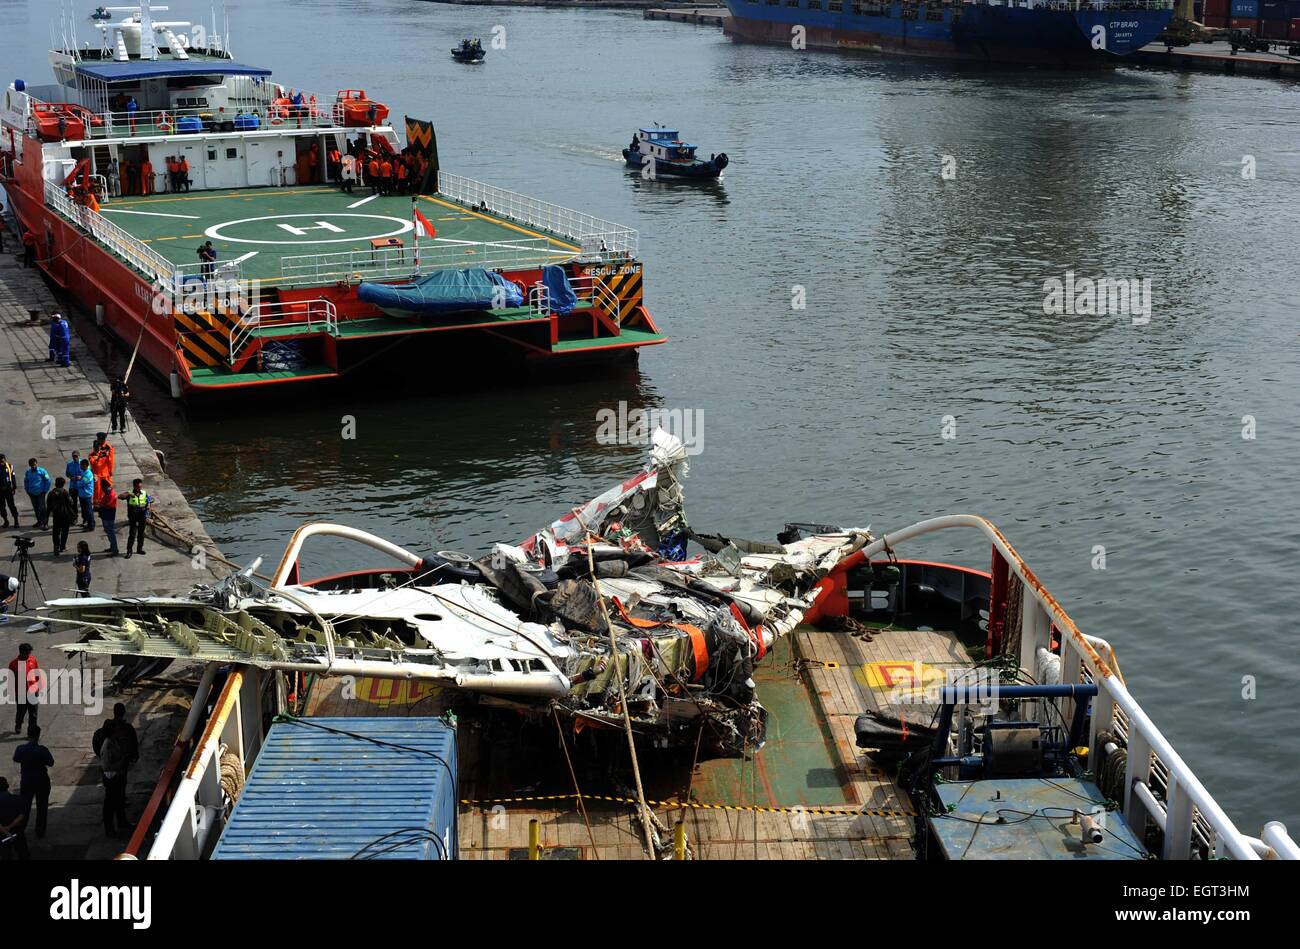 Jakarta, Indonesia. 2nd Mar, 2015. A large part of AirAsia QZ 8501 fuselage is lifted from the rescue ship Crest Onyx at Tanjung Priok harbor in Jakarta, Indonesia, March 2, 2015. Indonesian officials said on Saturday that the final major part of the fuselage of the AirAsia QZ 8501 has been retrieved. AirAsia QZ 8501 was crashed in Karimata Strait enroute from Indonesia's city of Surabaya for Singapore on Dec. 28, killing all 162 people onboard. © Agung Kuncahya B./Xinhua/Alamy Live News Stock Photo